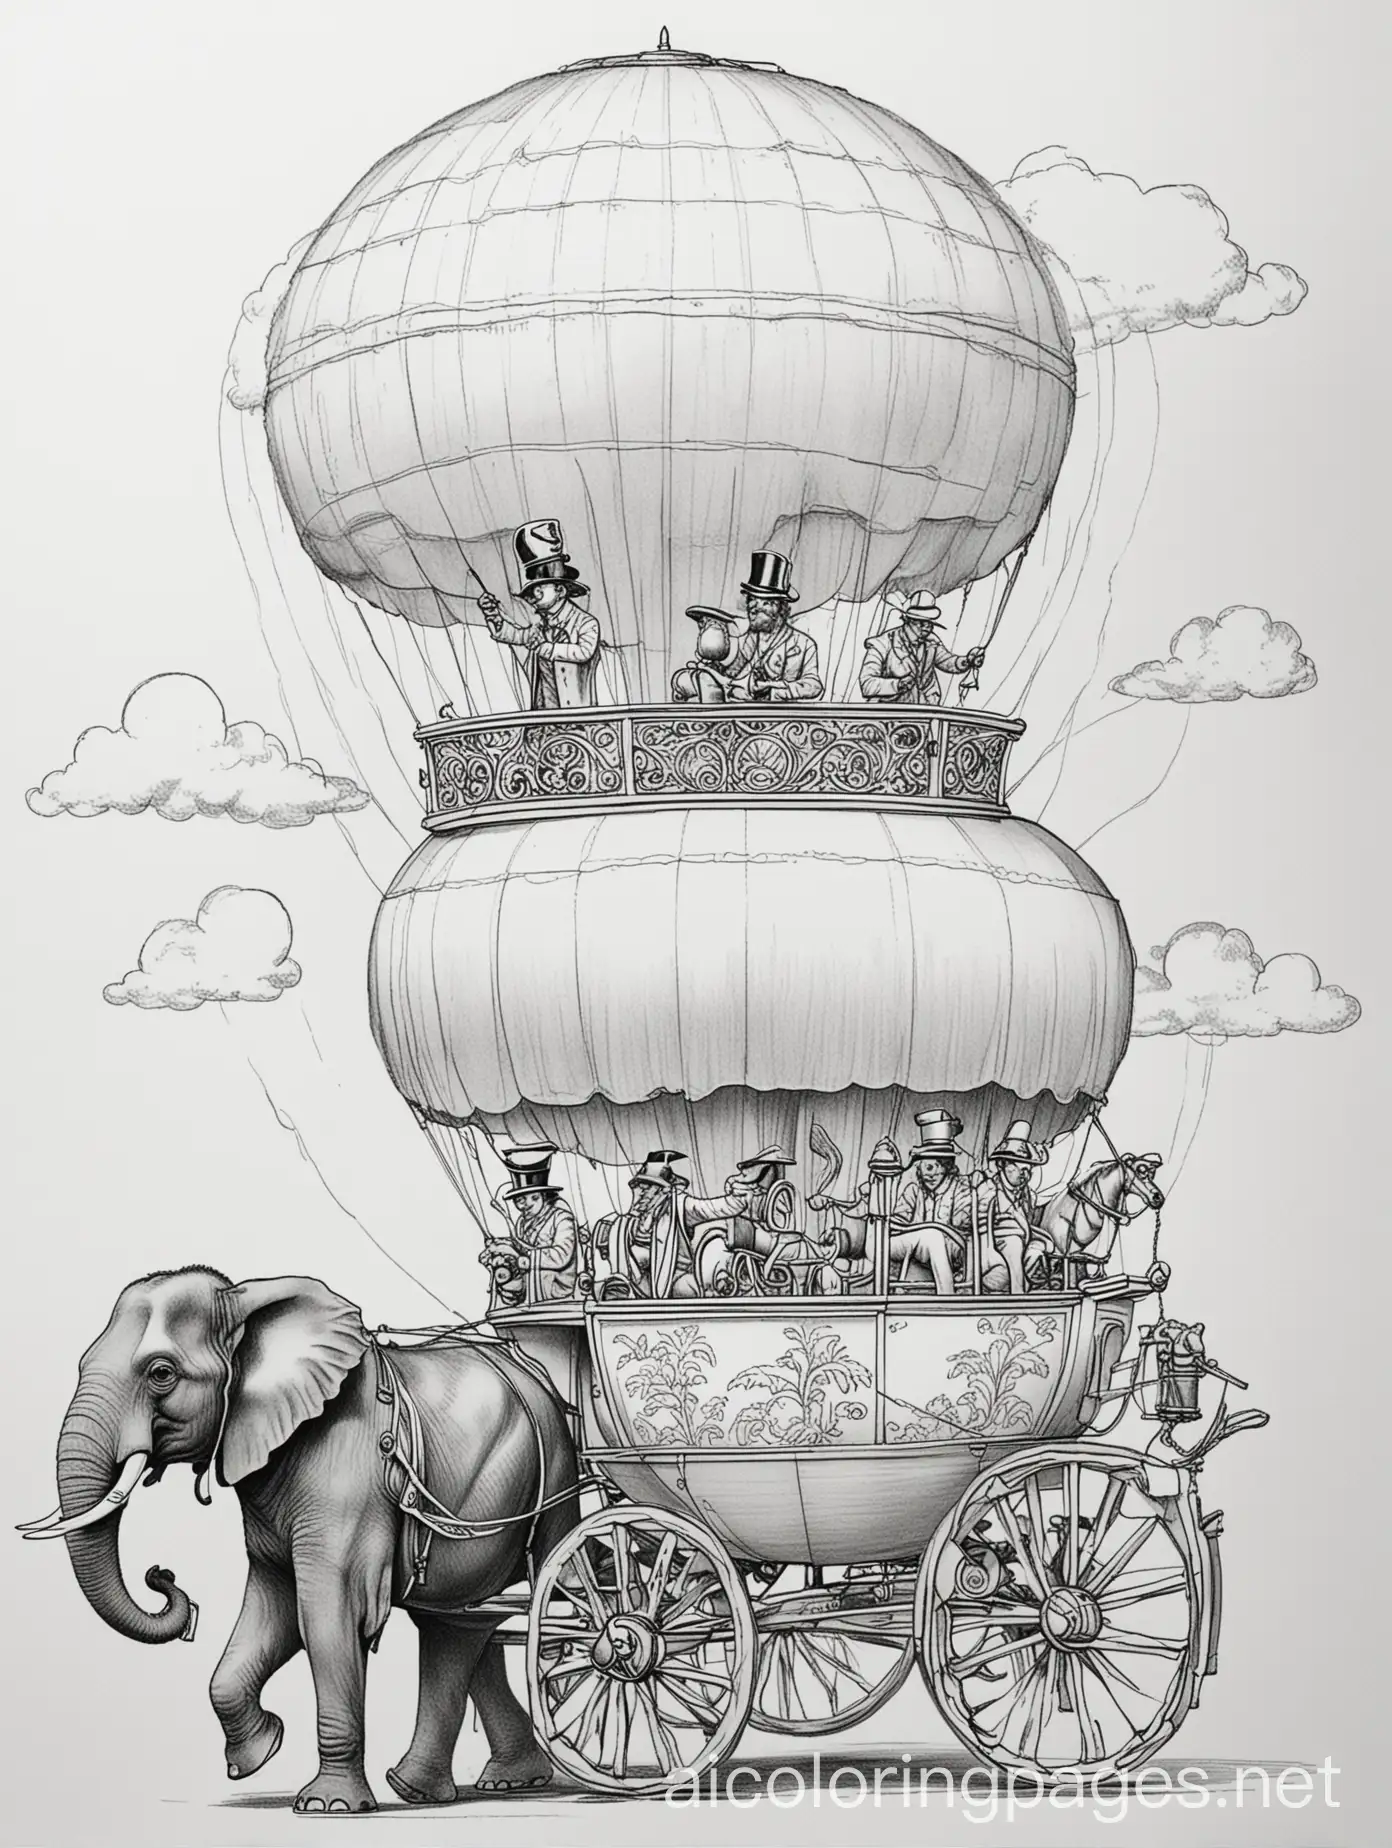 Steamer ship, globe, horse and carriage, man in top hat, riding an elephant, hot air balloon, posh london townhouse, different countries, Coloring Page, black and white, line art, white background, Simplicity, Ample White Space. The background of the coloring page is plain white to make it easy for young children to color within the lines. The outlines of all the subjects are easy to distinguish, making it simple for kids to color without too much difficulty